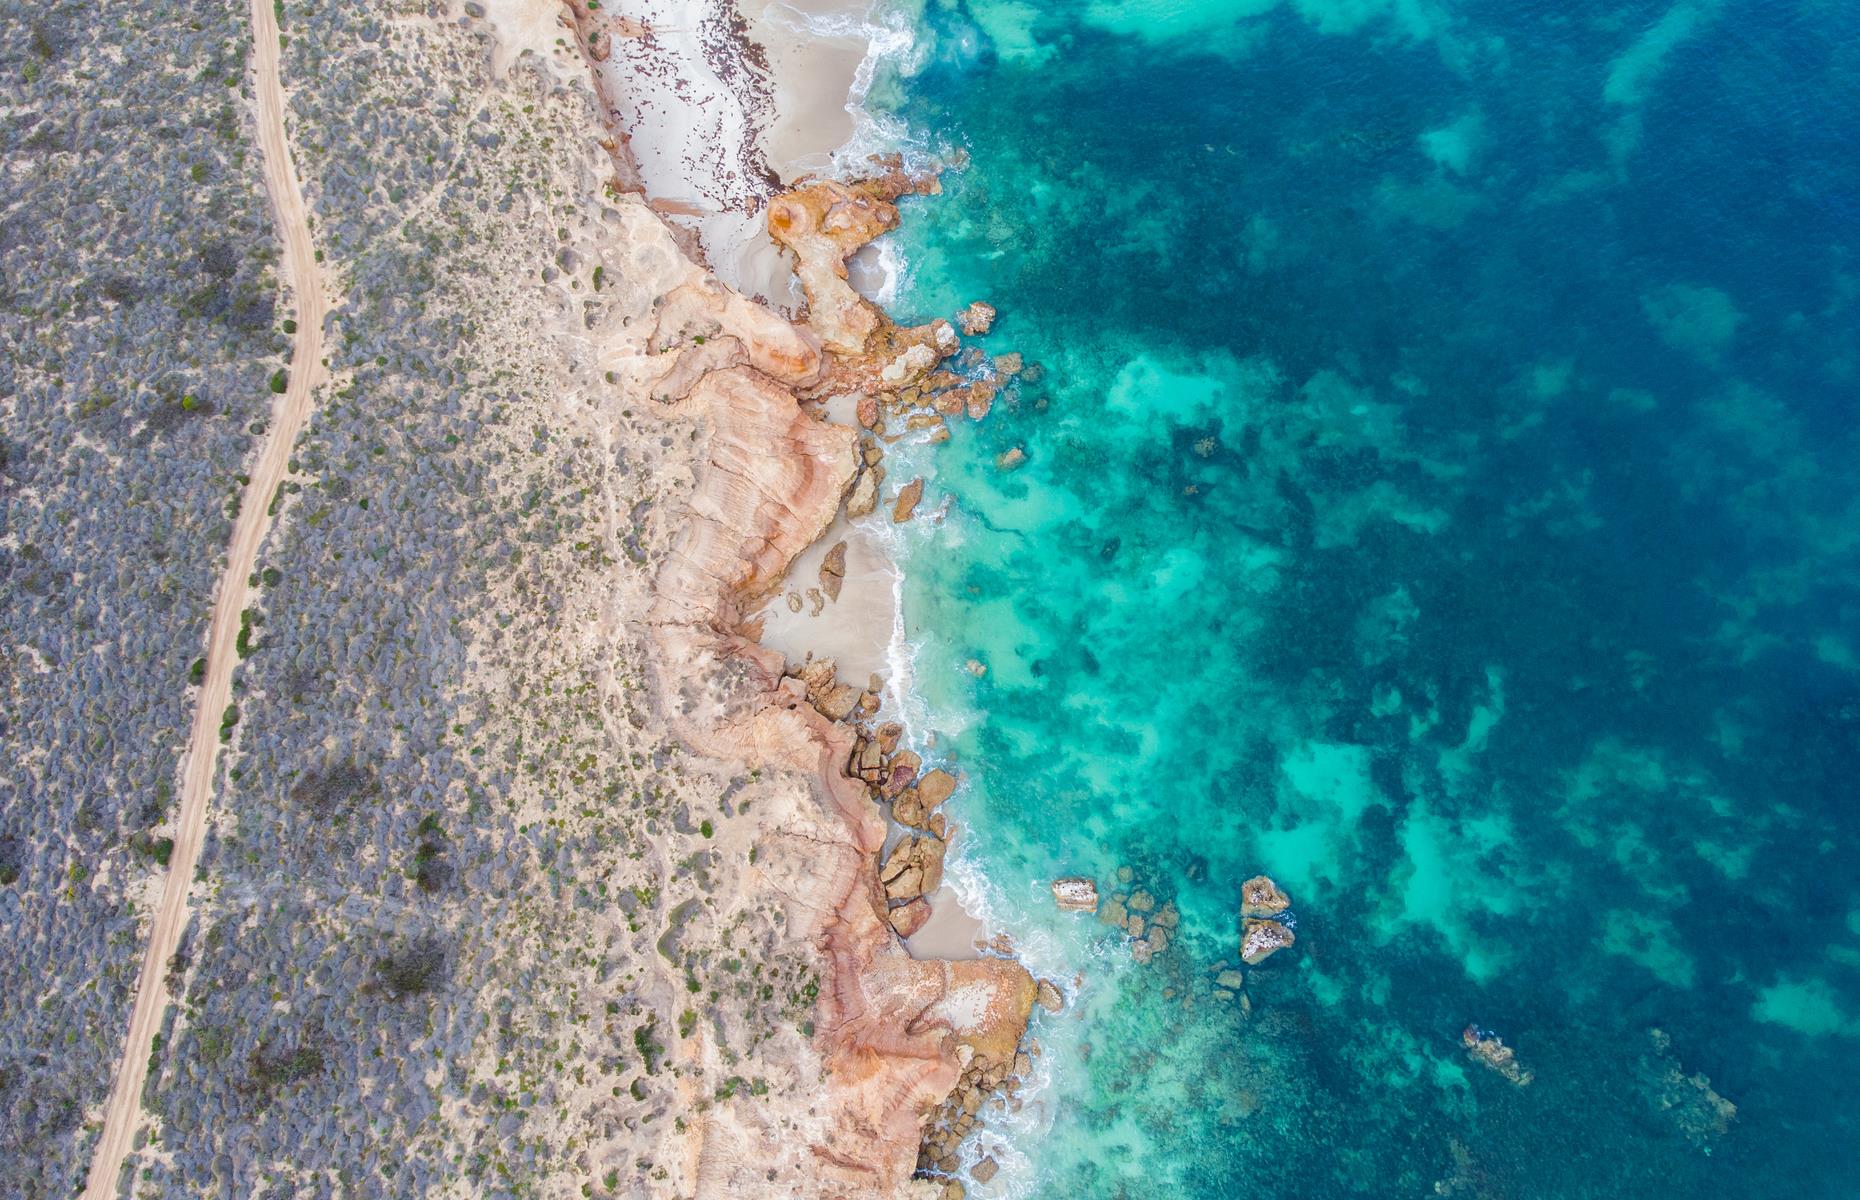 <p>The Eyre Peninsula is where the outback meets the Southern Ocean with spectacular results. Follow <a href="https://southaustralia.com/travel-blog/the-seafood-frontier-road-trip-port-lincoln-to-streaky-bay">the Seafood Frontier</a> road trip route to discover why this less-visited part of South Australia enchants with its sensational seafood, marine life and incredible beaches. Start in Port Lincoln, which sits on Boston Bay – the largest natural harbor in Australia and the country’s seafood capital with a huge southern bluefin tuna industry. It’s also a hub of marine adventures, including the only cage dive with great white sharks in Australia.</p>